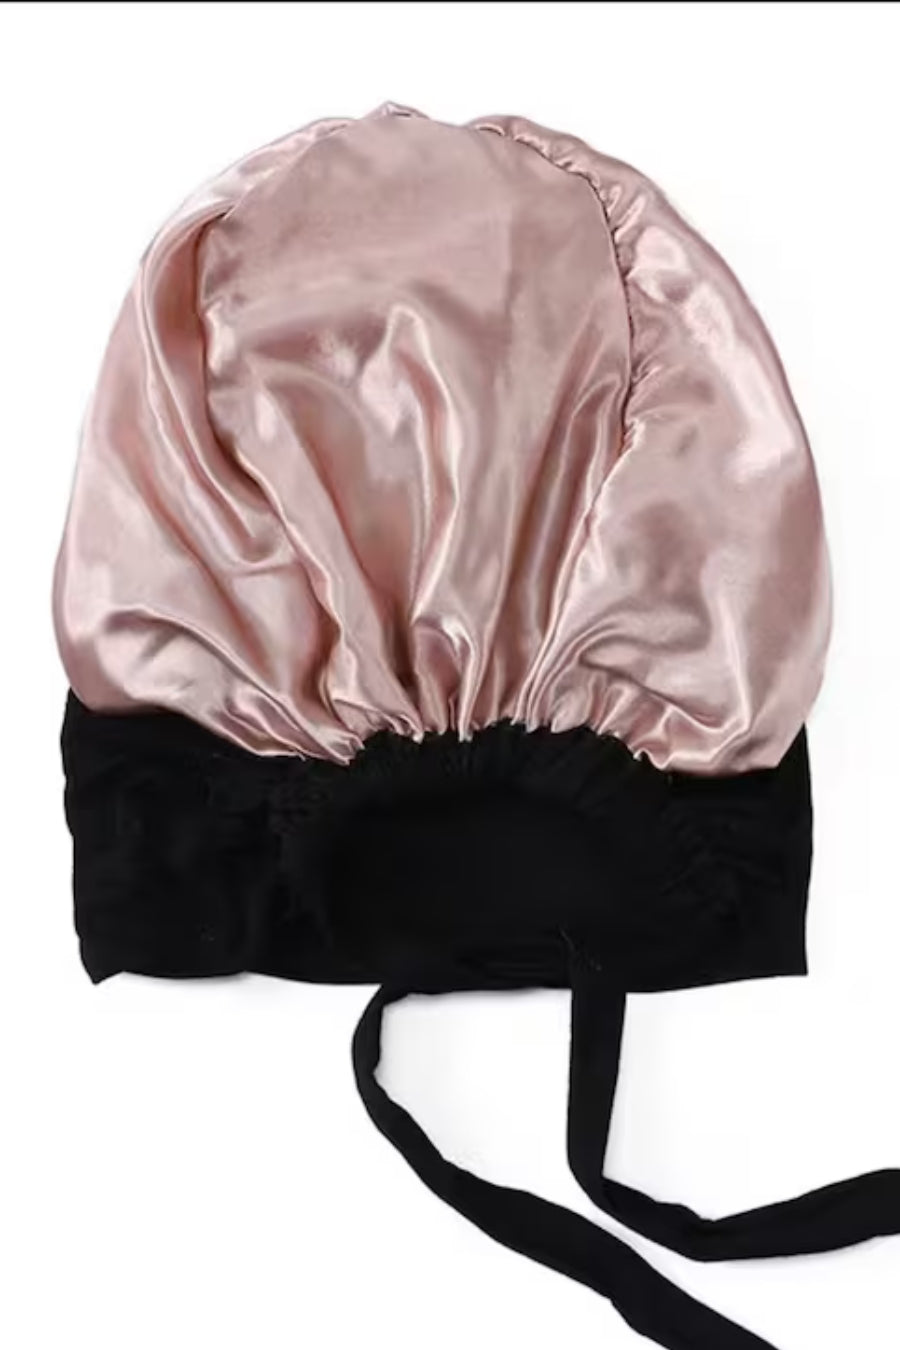 Satin Lined Underscarf (Cap)